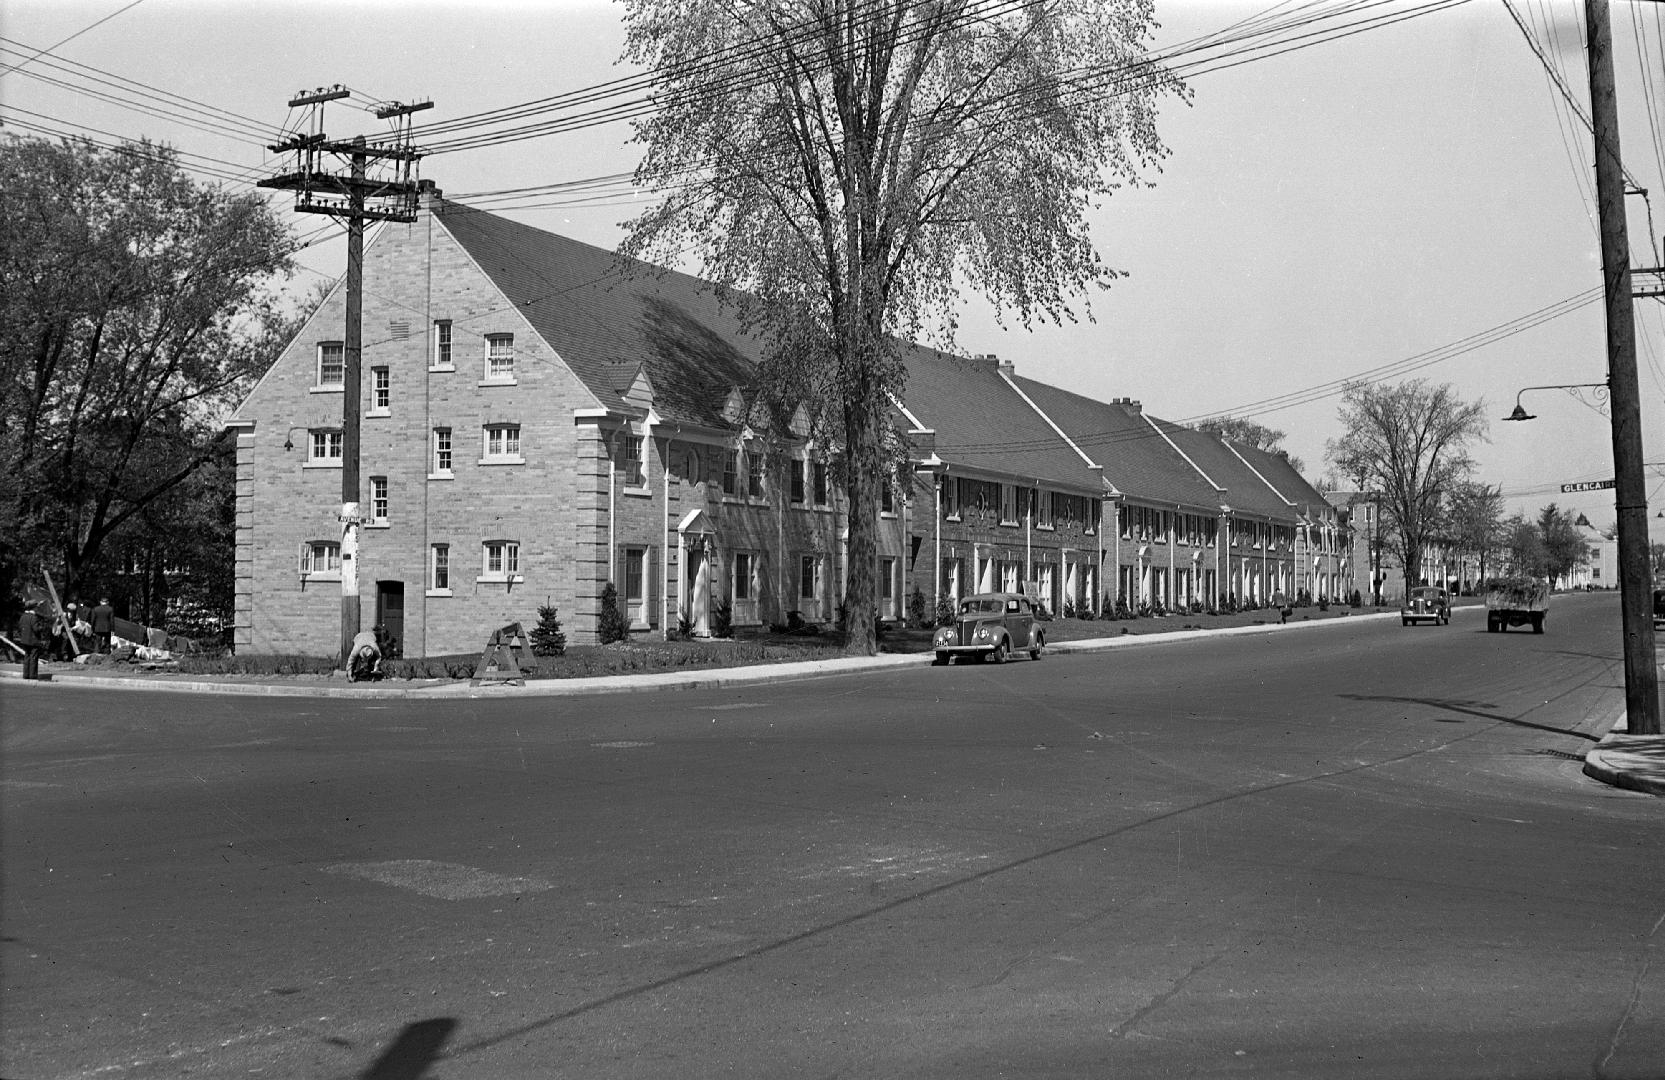 Avenue Road, looking north from Glencairn Avenue. Image shows an intersection and a row of hous ...